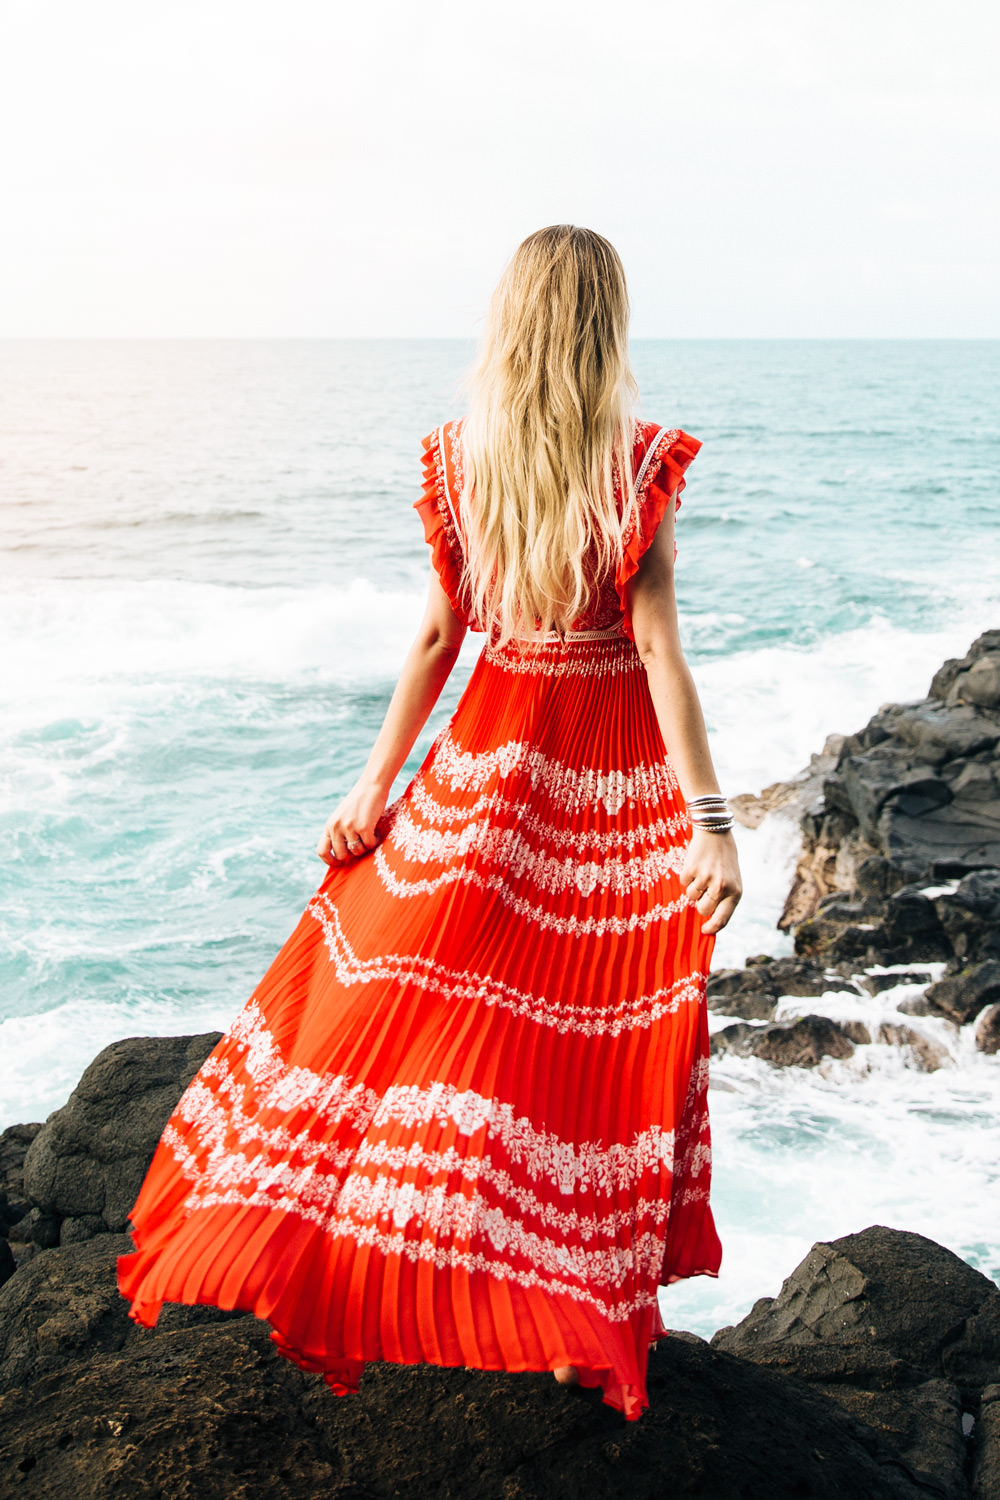 Dash of Darling wears a red Self Portrait maxi dress at Queens bath in Kauai, Hawaii while staying at the St. Regis Princeville Resort.